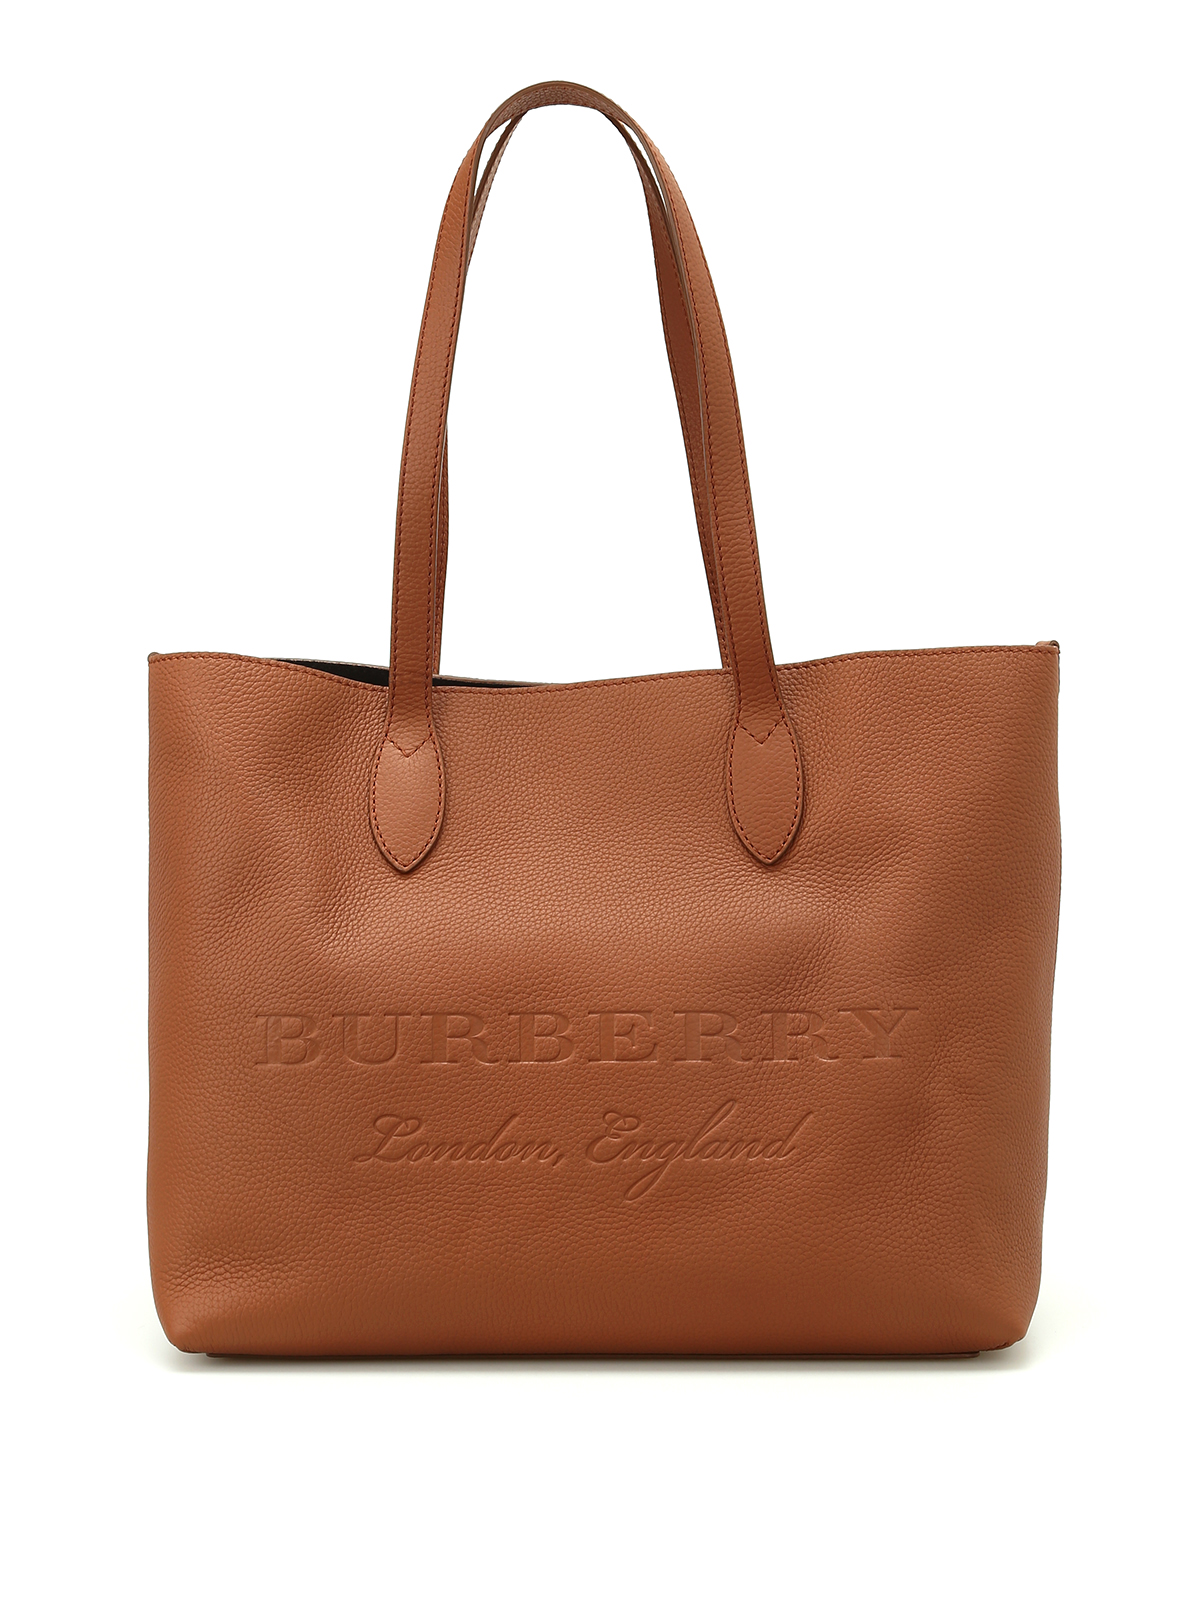 Totes bags Burberry - Remington brown leather large tote - 4060092